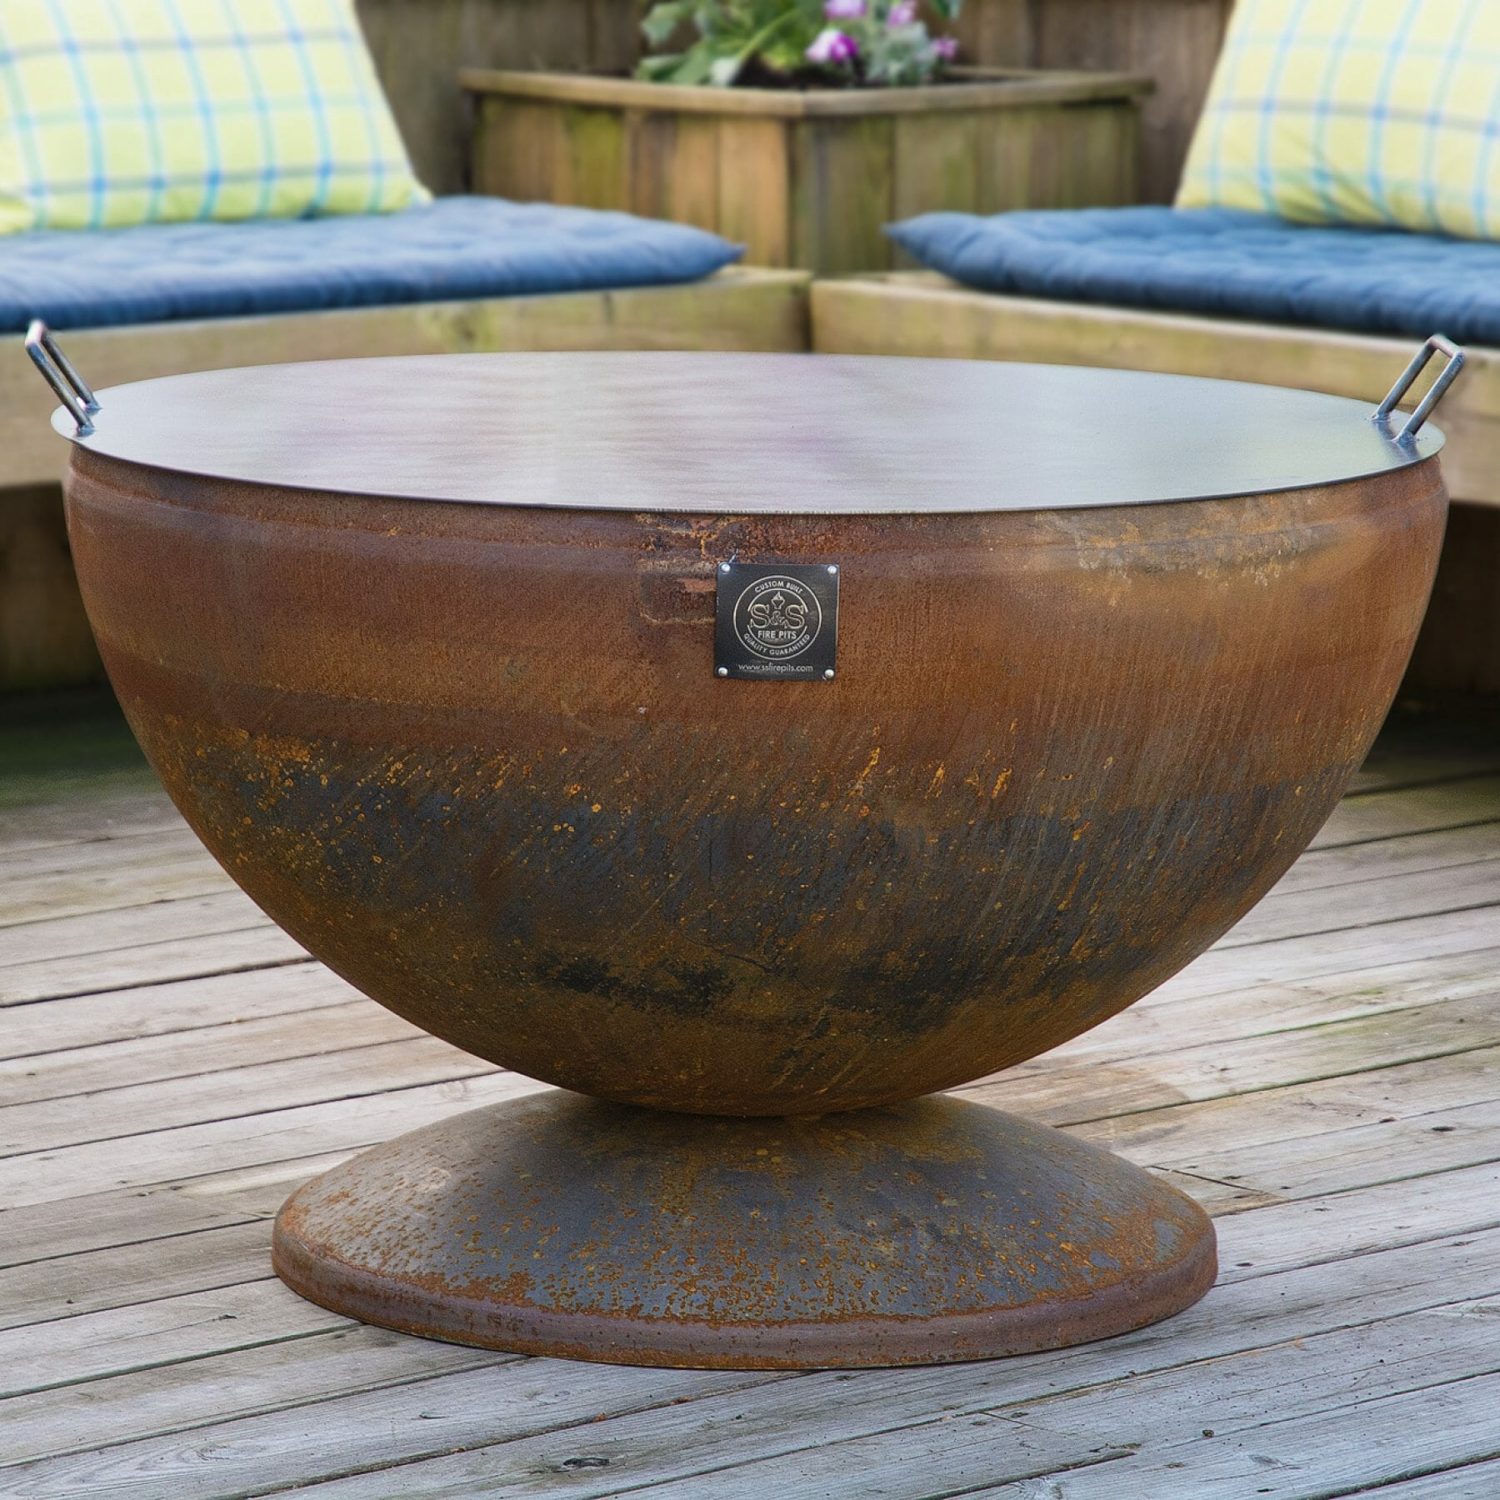 Don Ts Of Using A Fire Pit On Wooden Deck, Deck Fire Pit Images